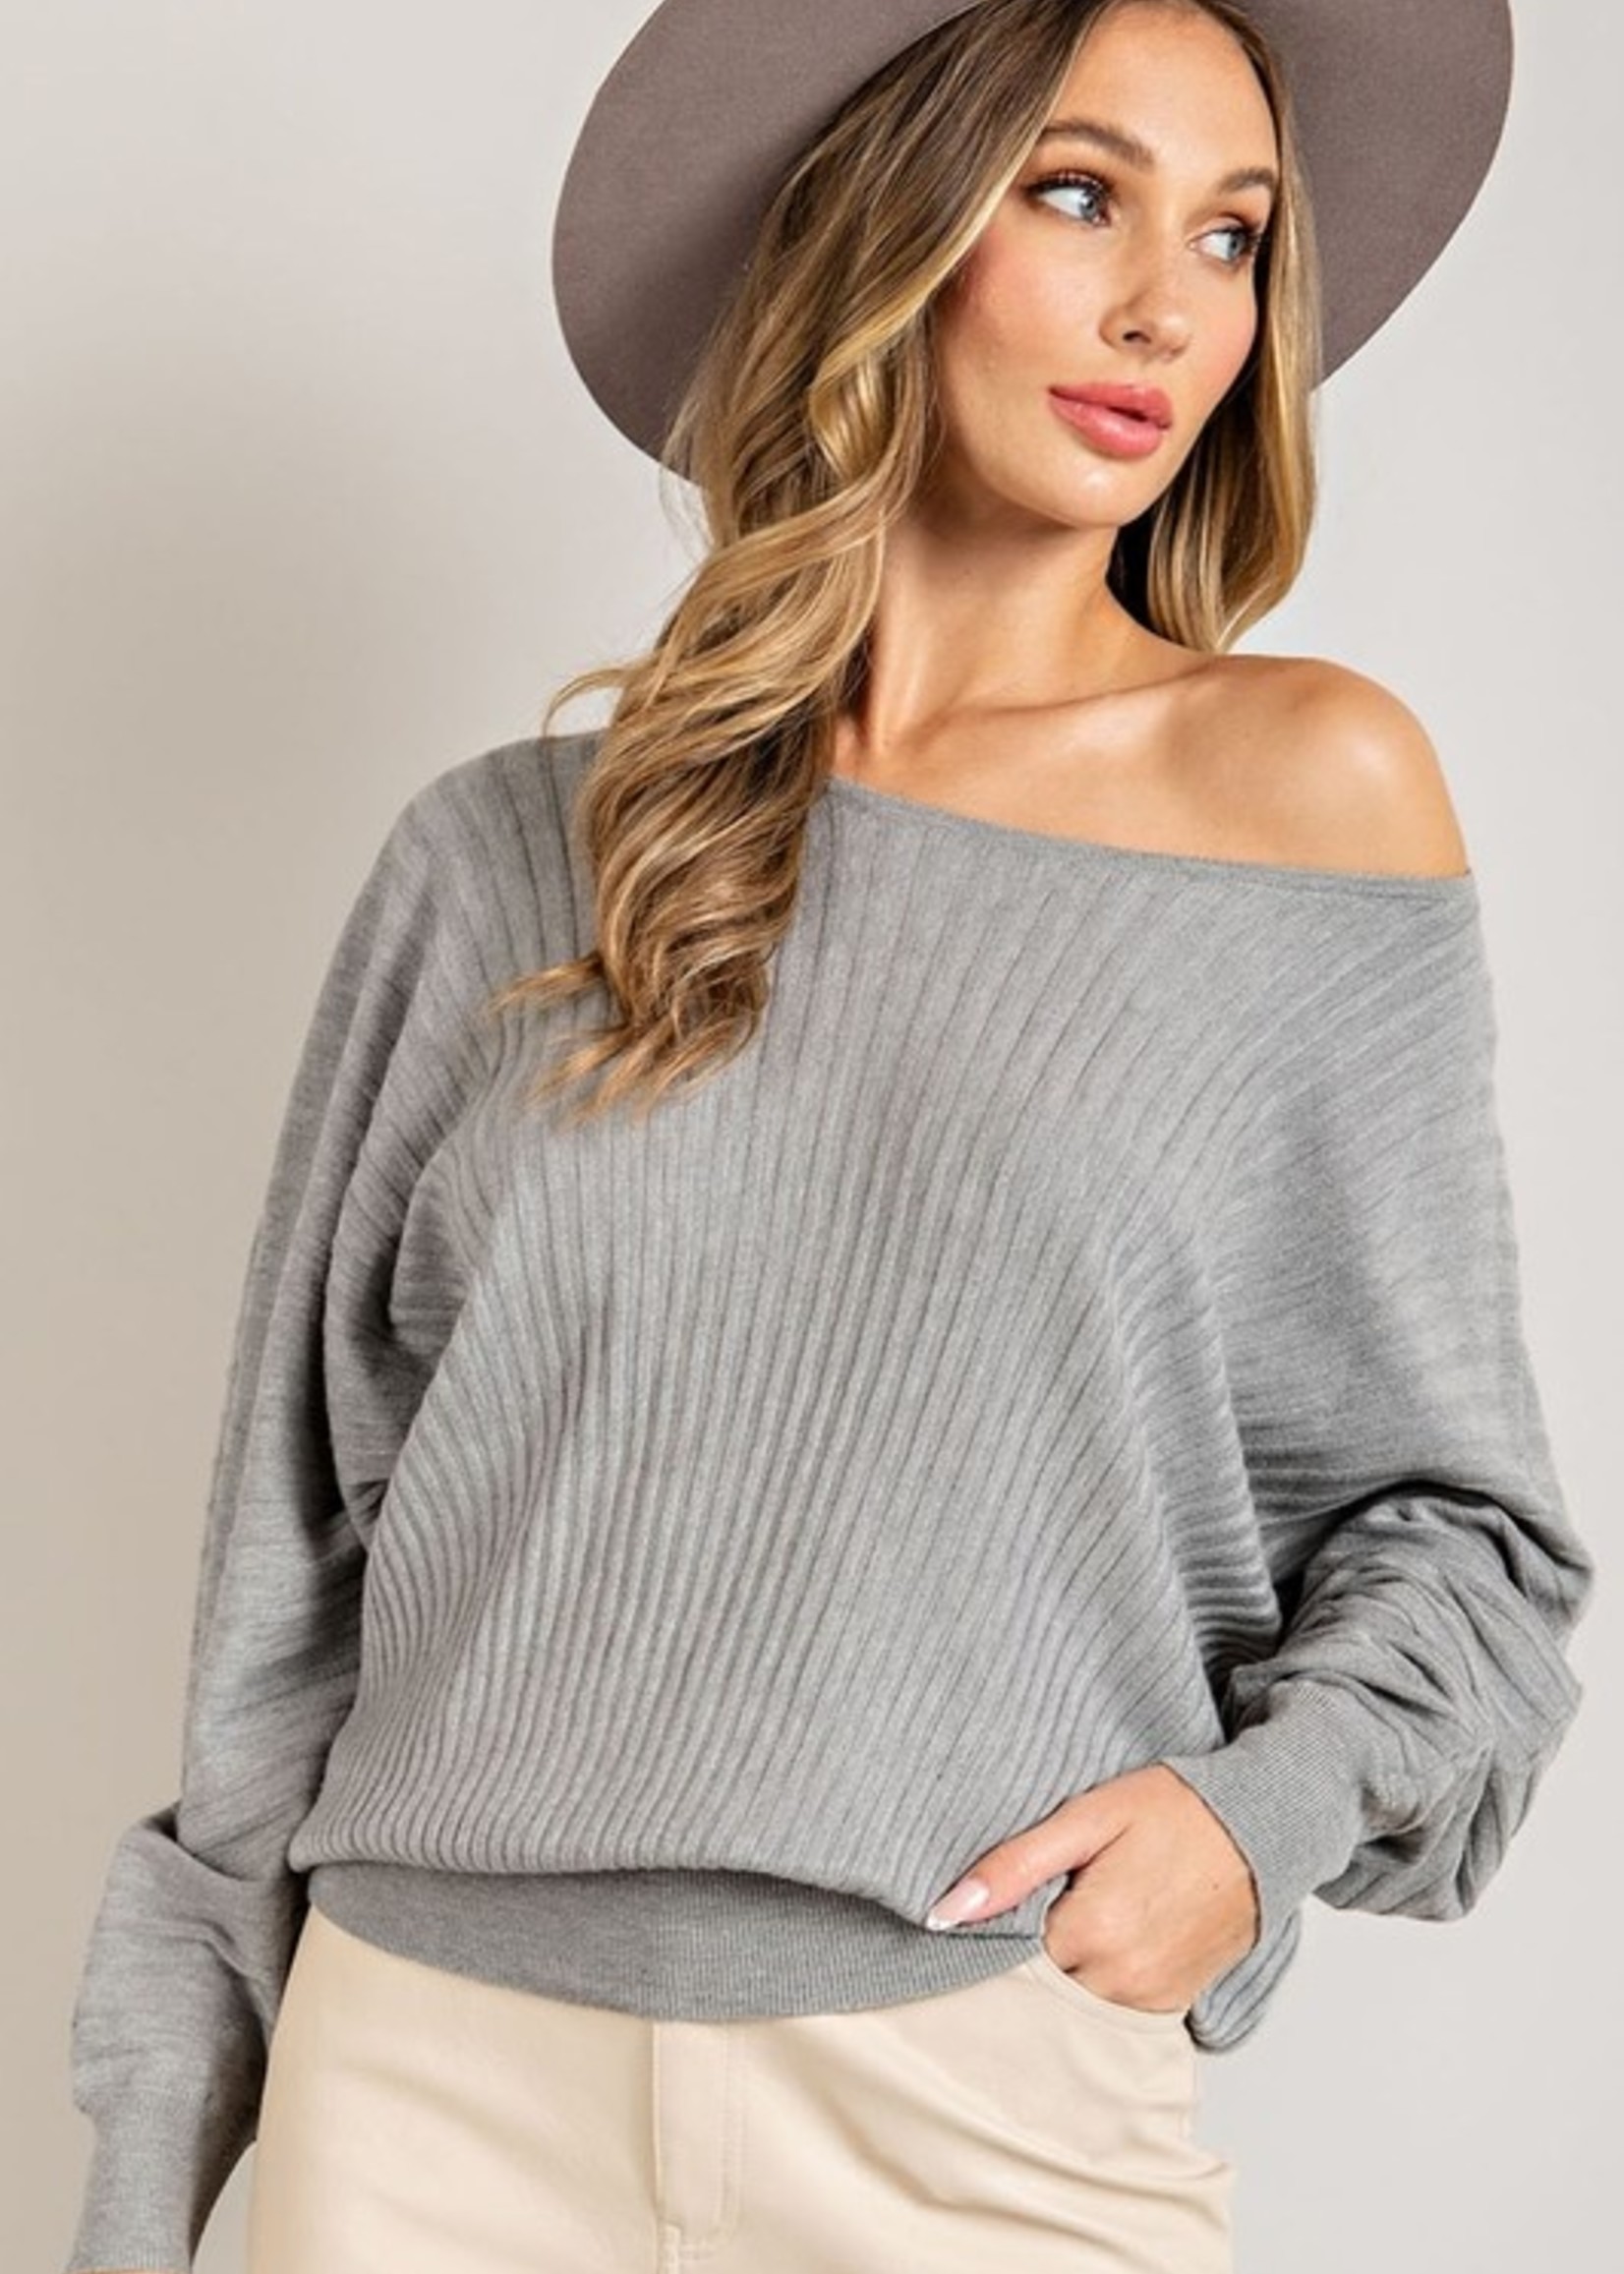 Boat neck top 2 colors